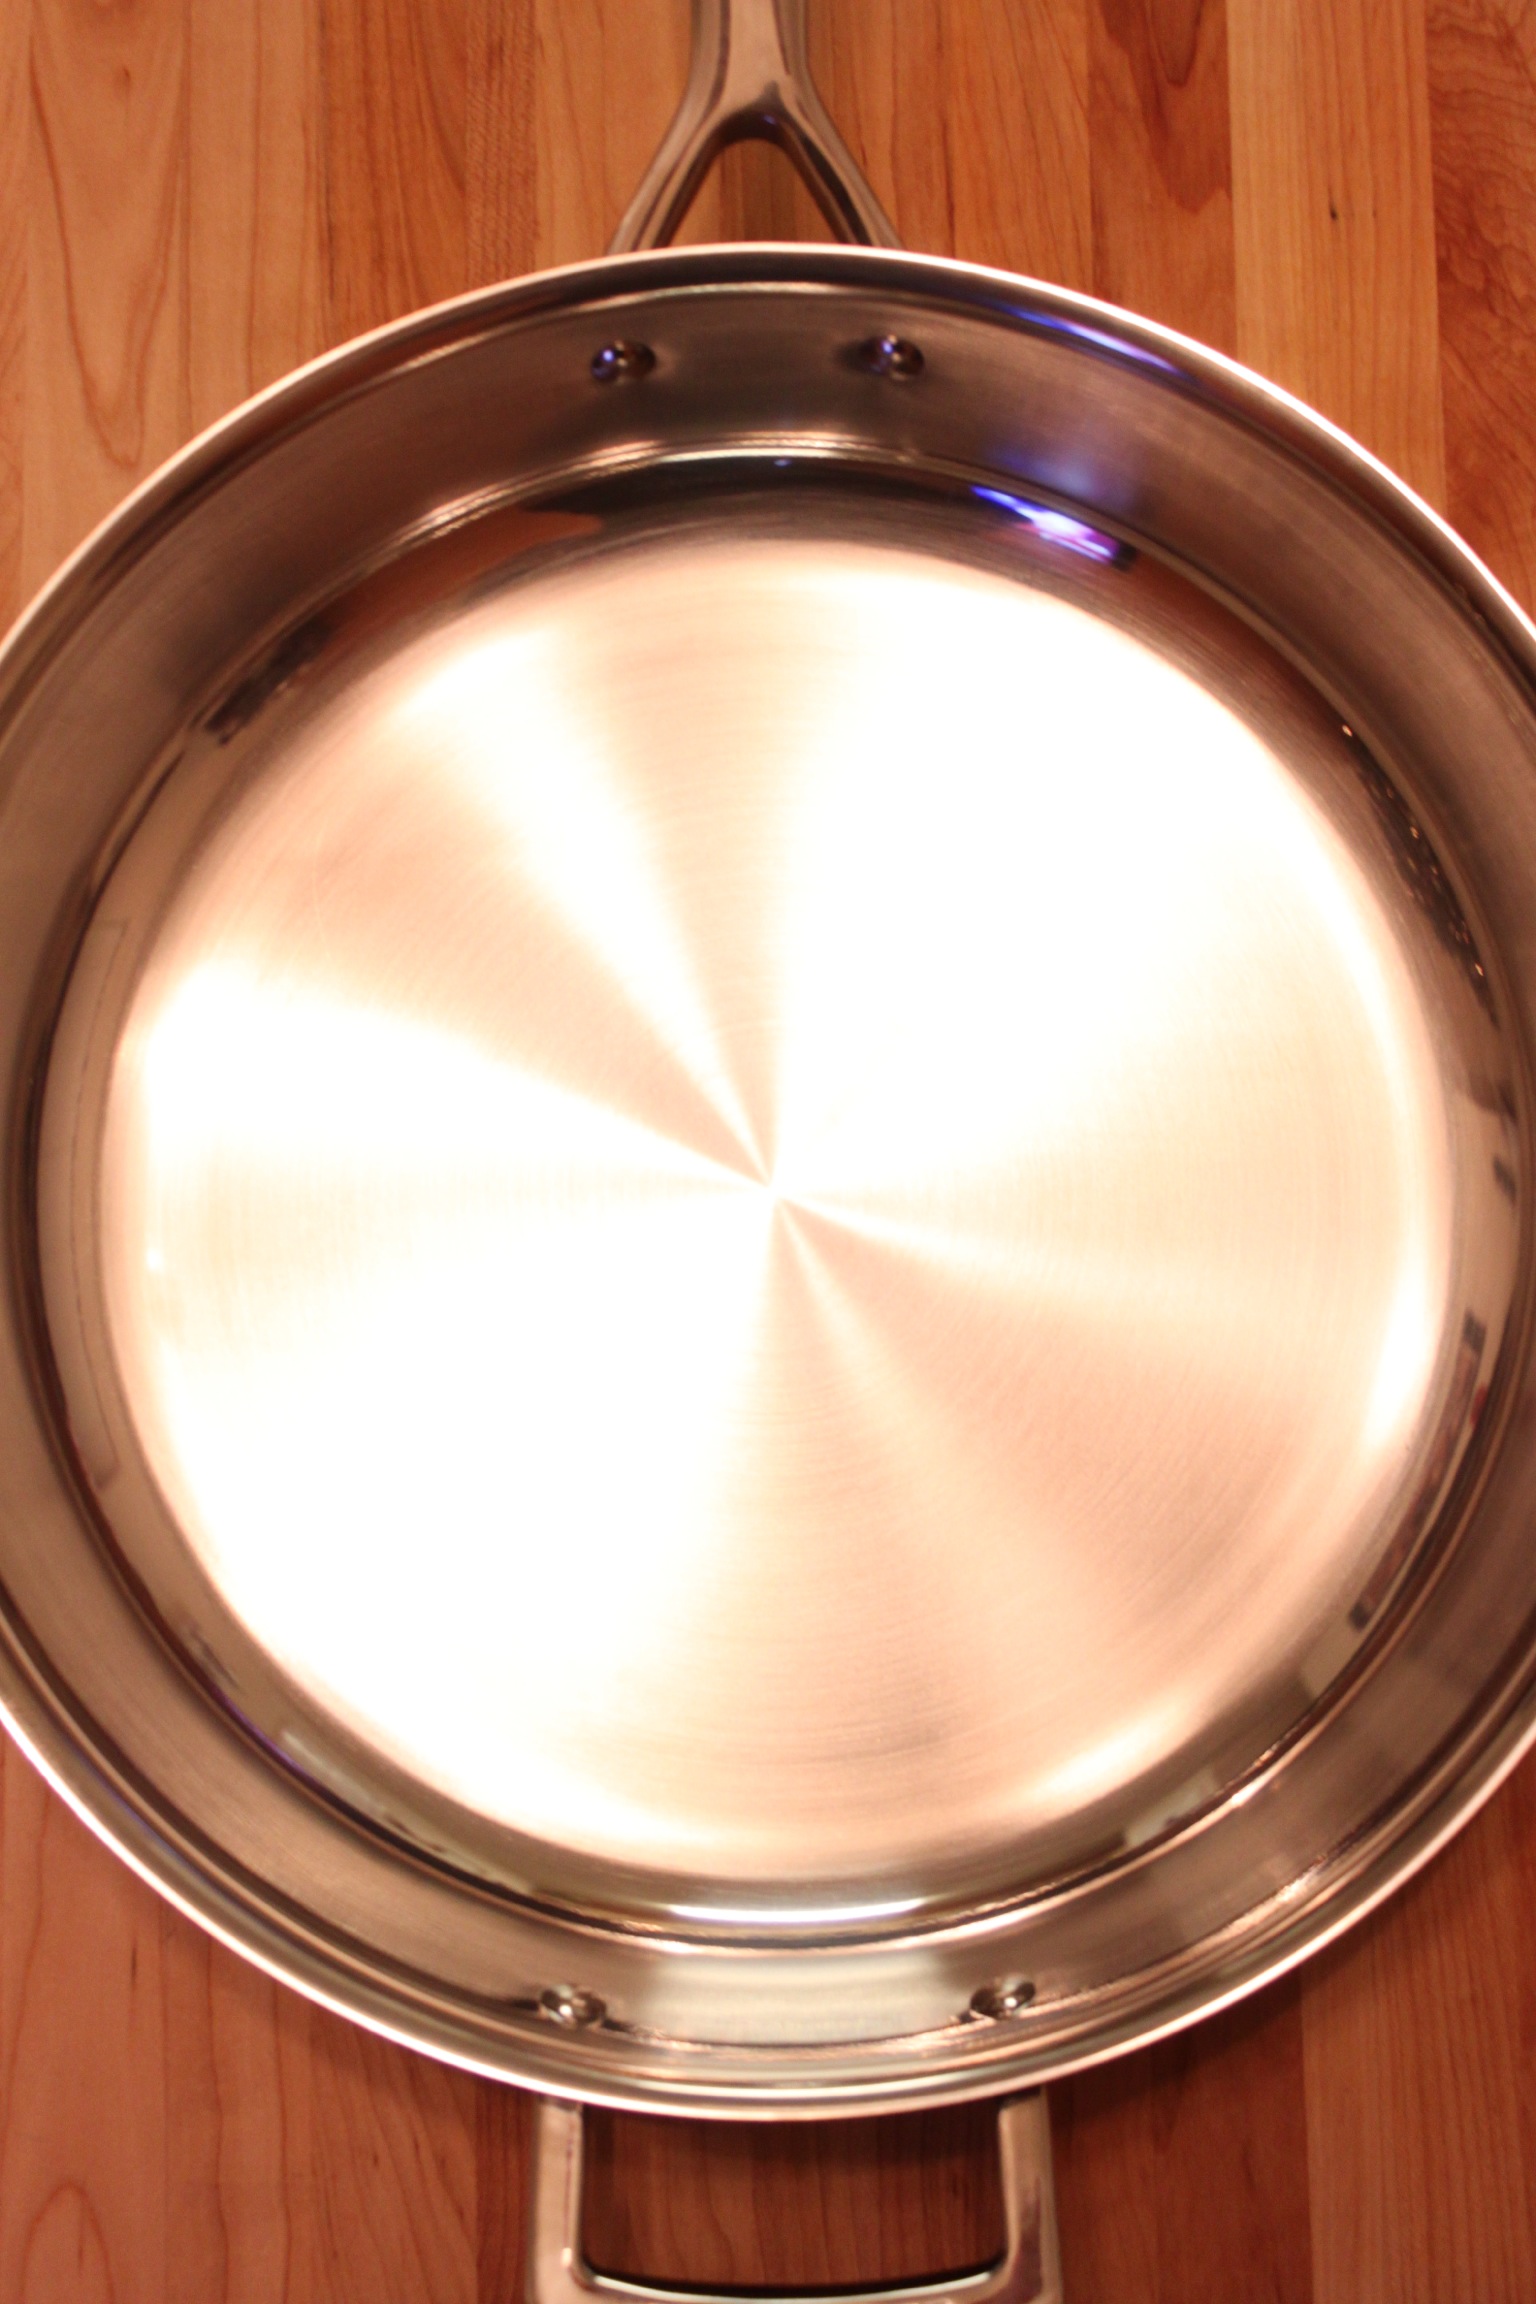 https://brimckoy.com/wp-content/uploads/2012/12/07-508-post/how-to-cook-in-stainless-steel-pan.jpg